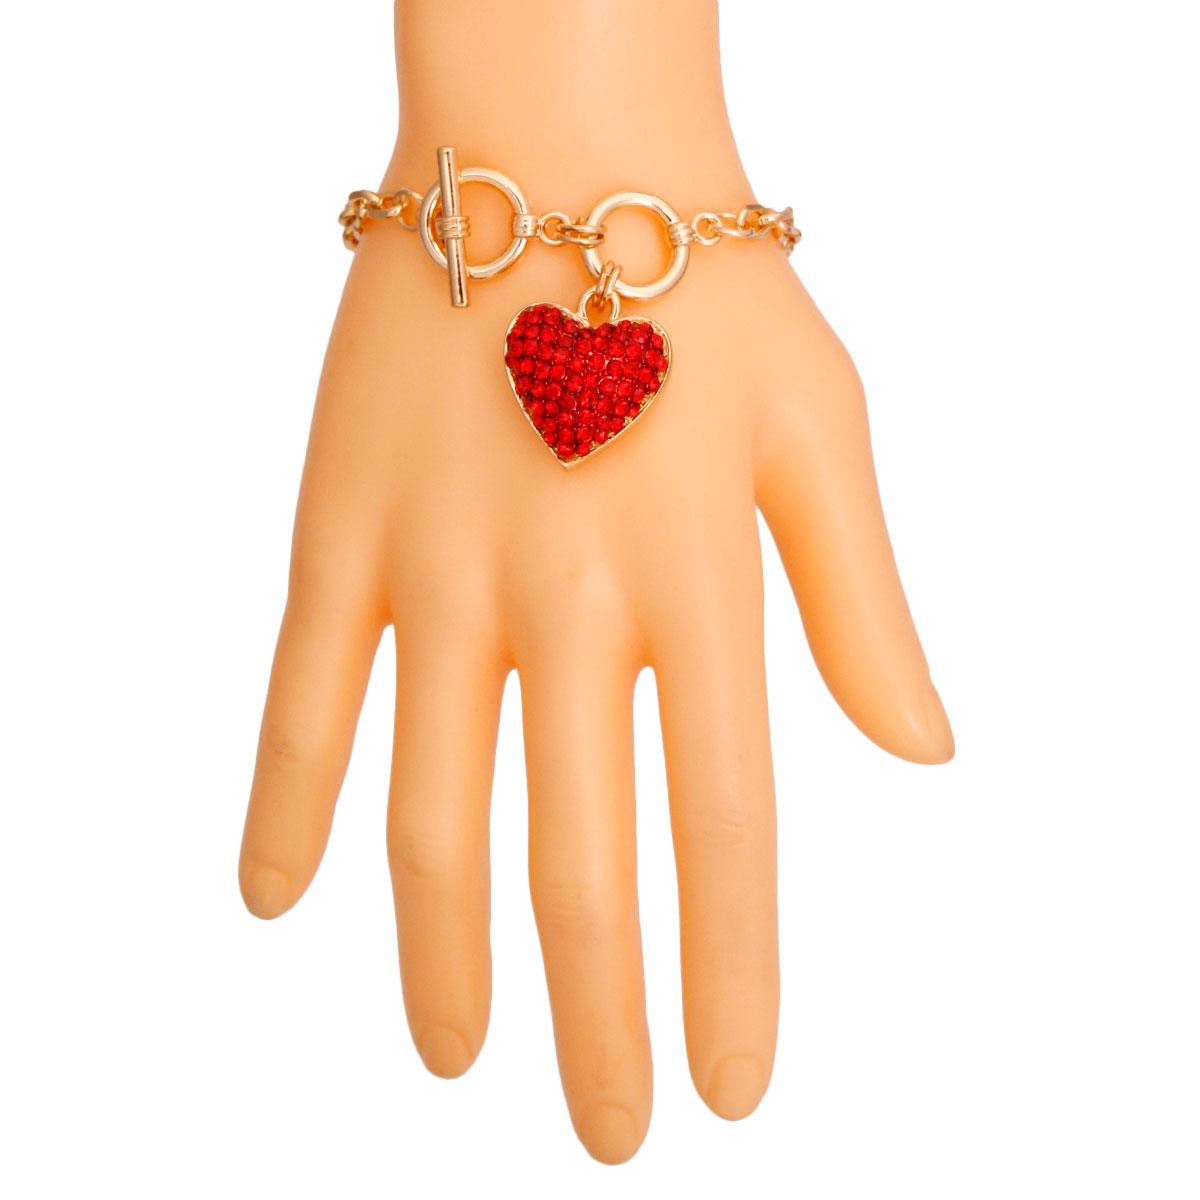 Get Your Hands on the Stunning Red Heart Charm Link Chain Bracelet